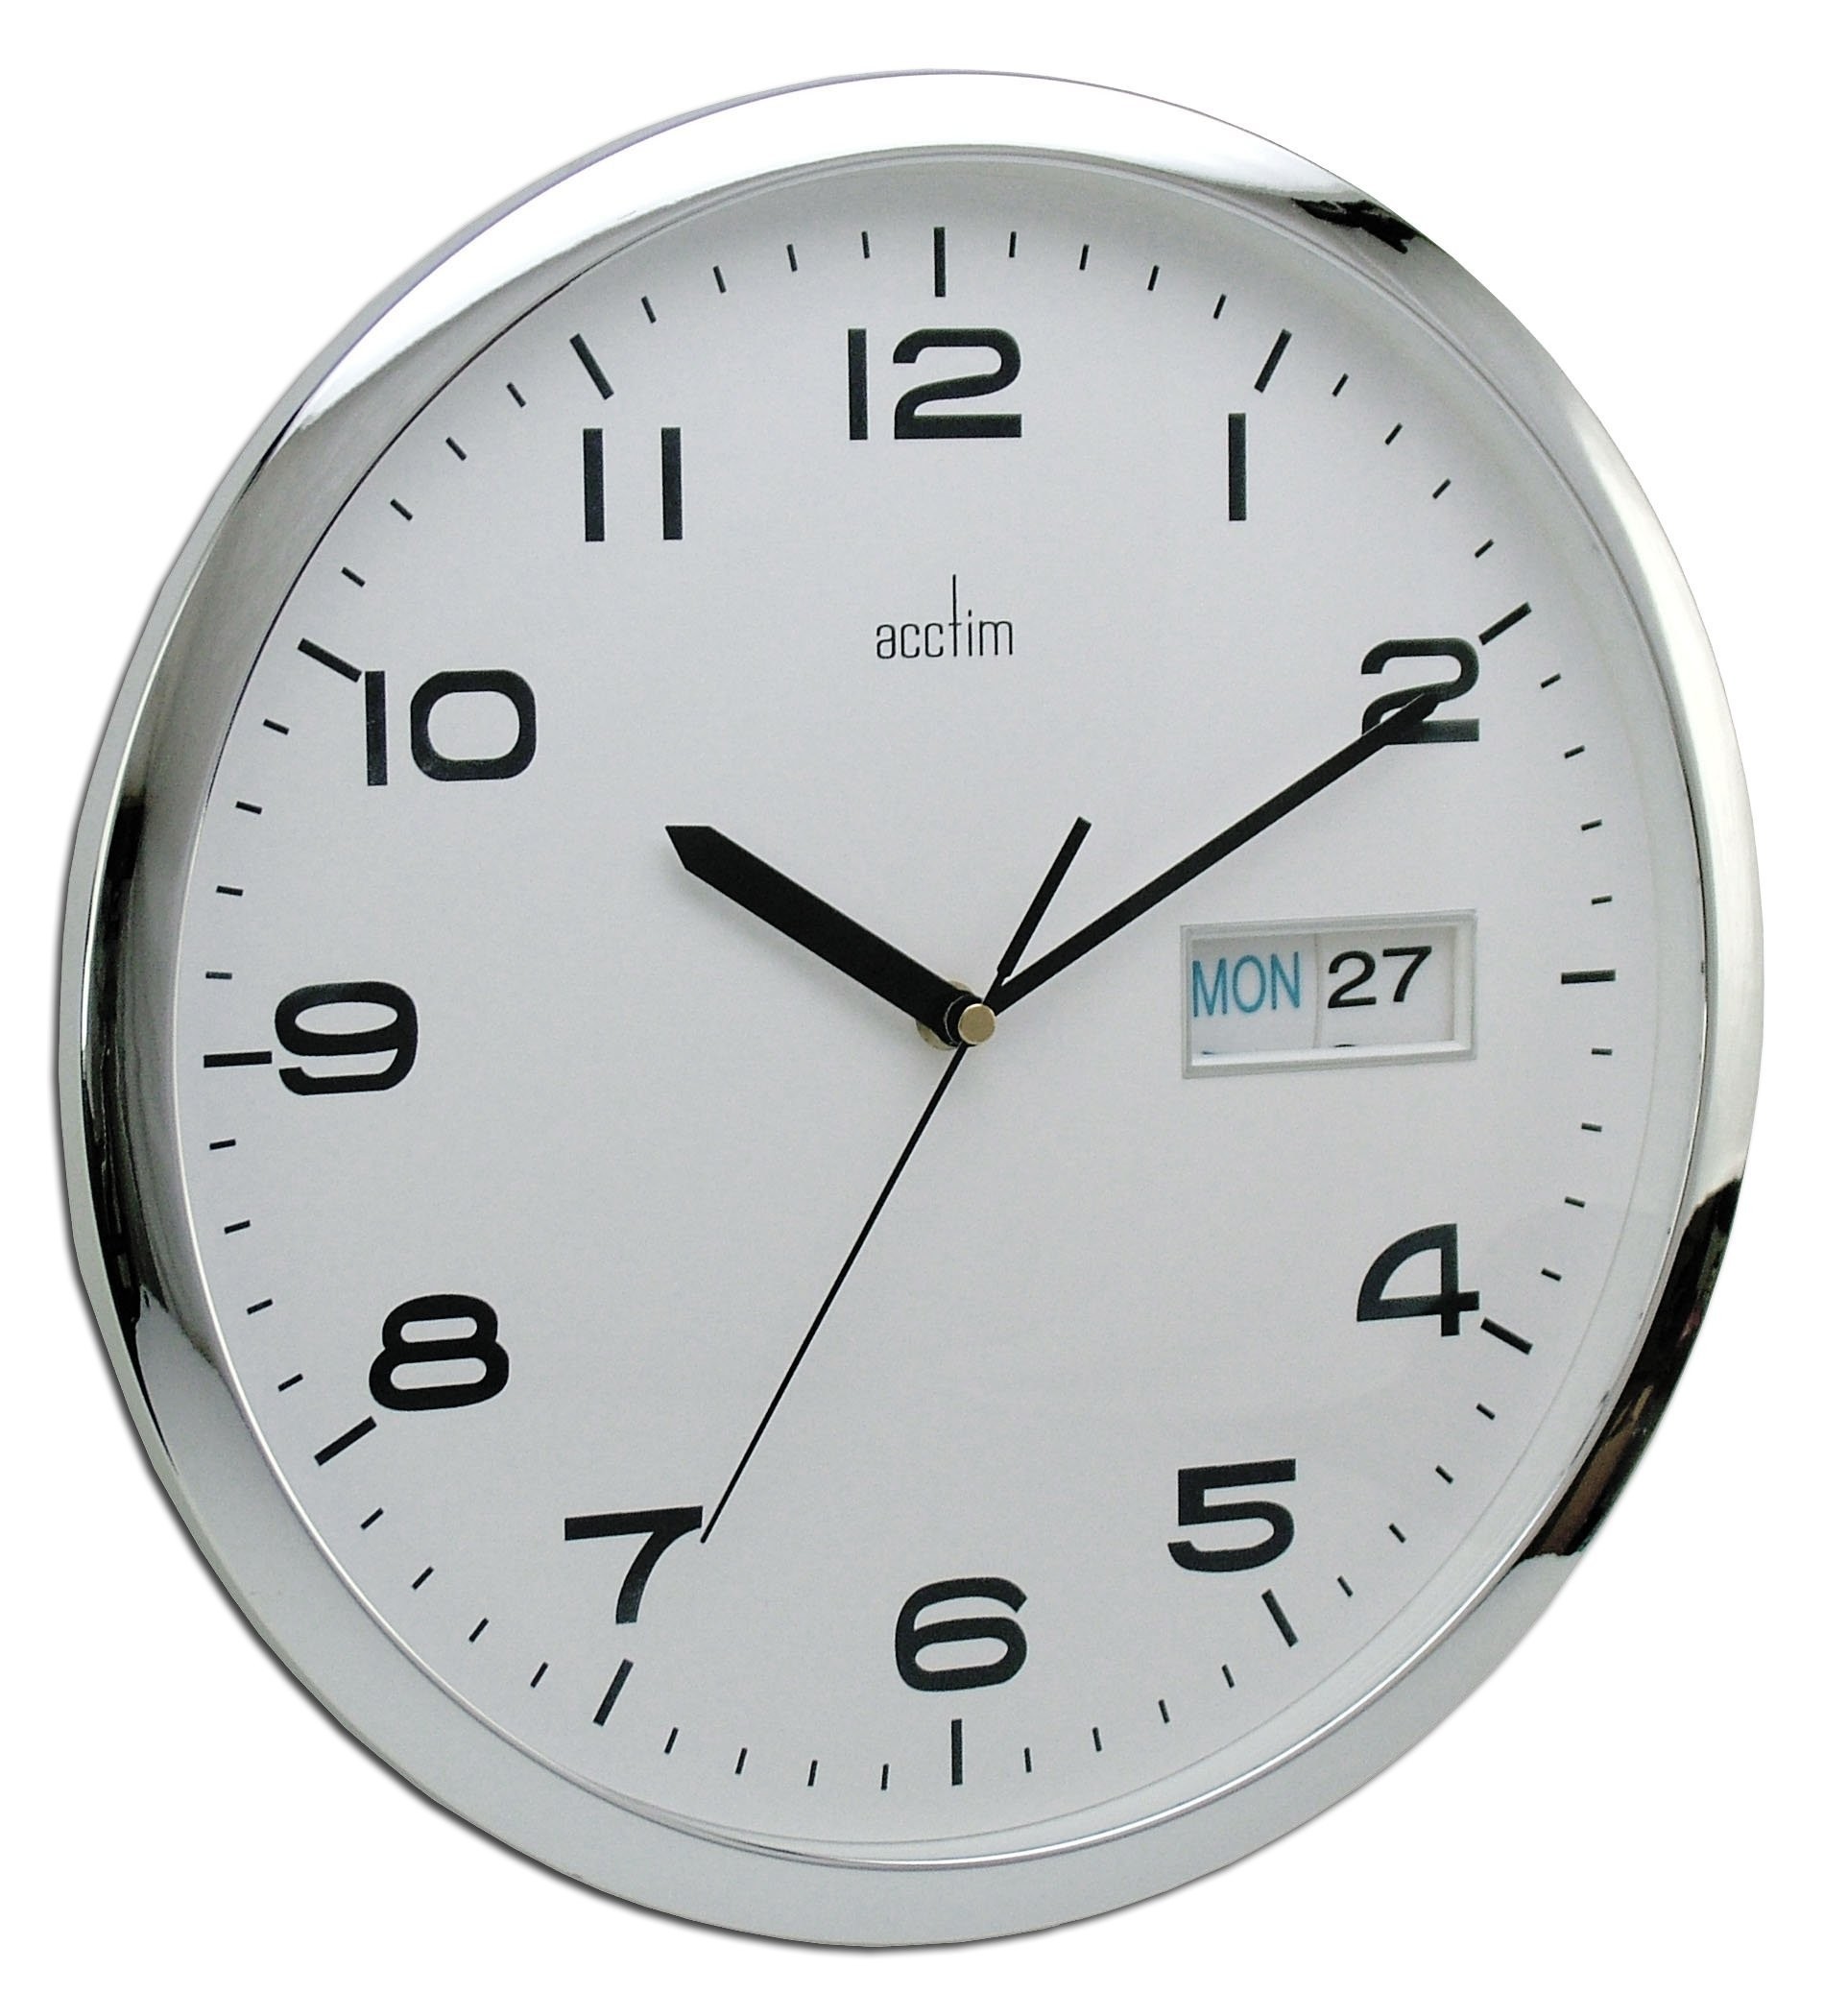 Clock with day display